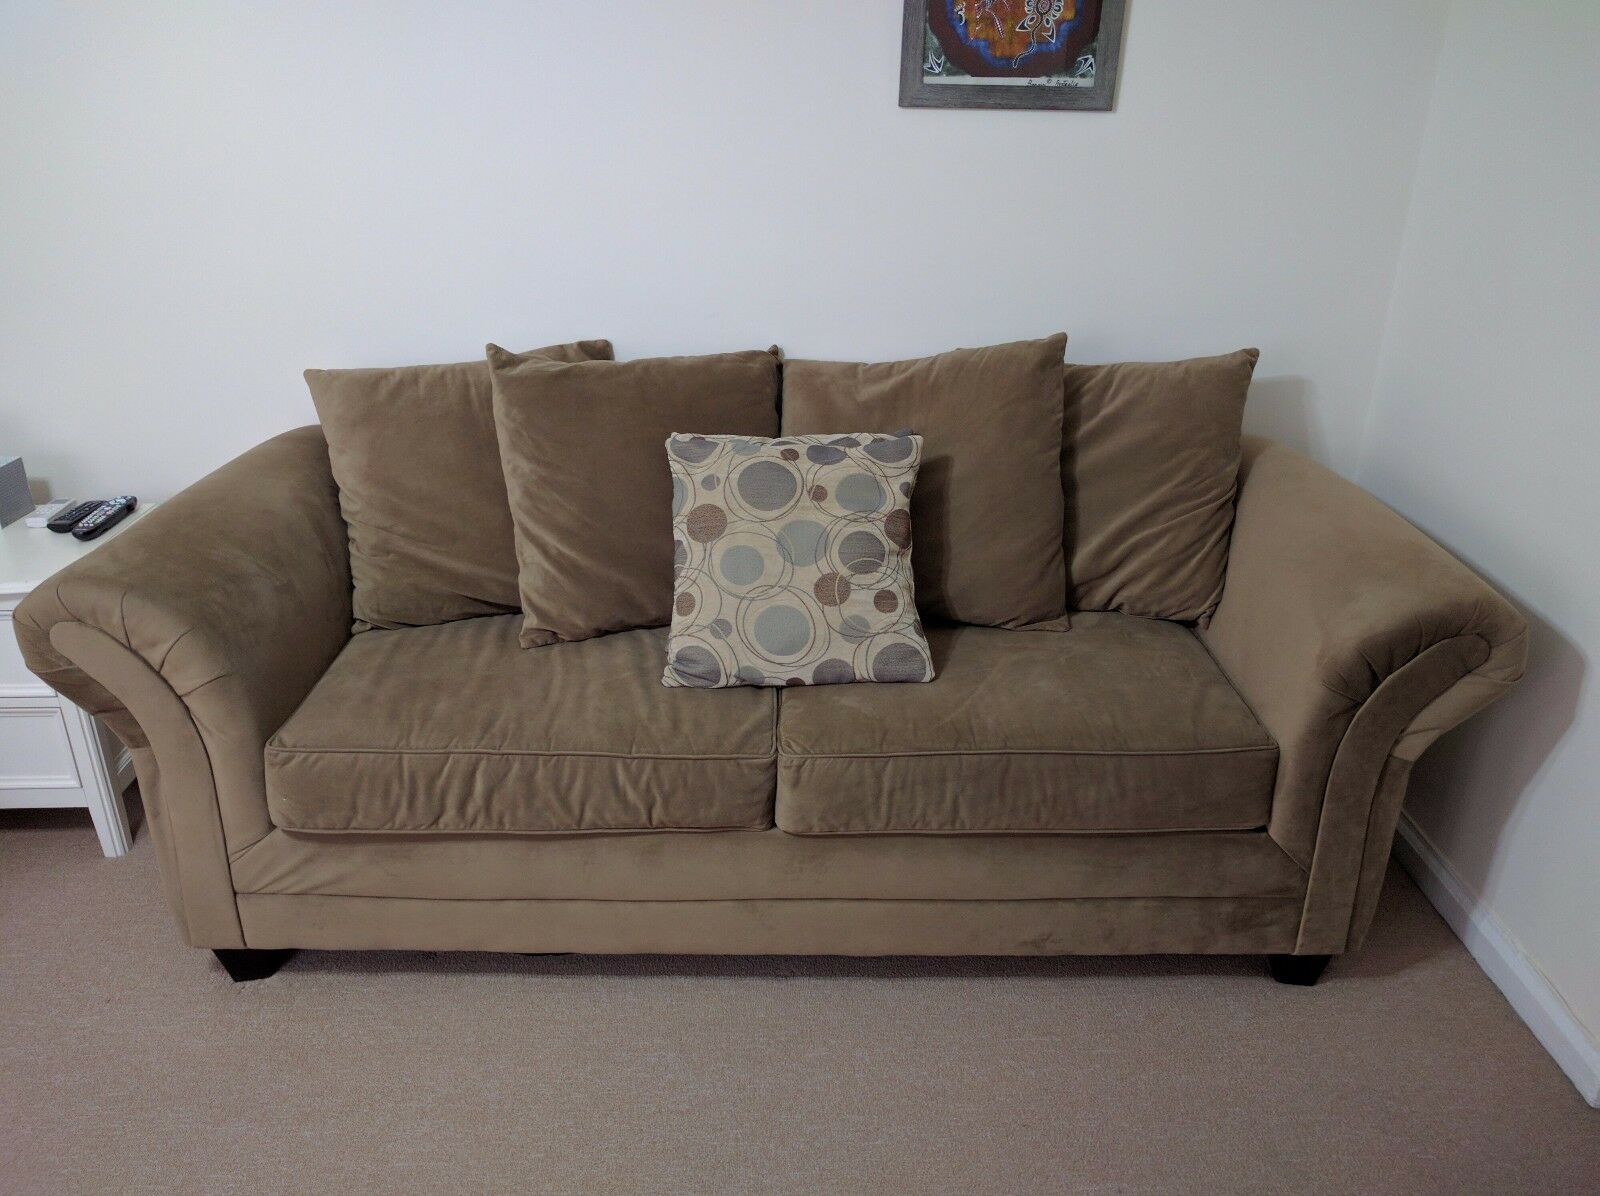 Bob's Discount Furniture: Desert Sand Suede 3 Seater Sofa Intended For Symmetry Fabric Power Reclining Sofas (View 1 of 15)